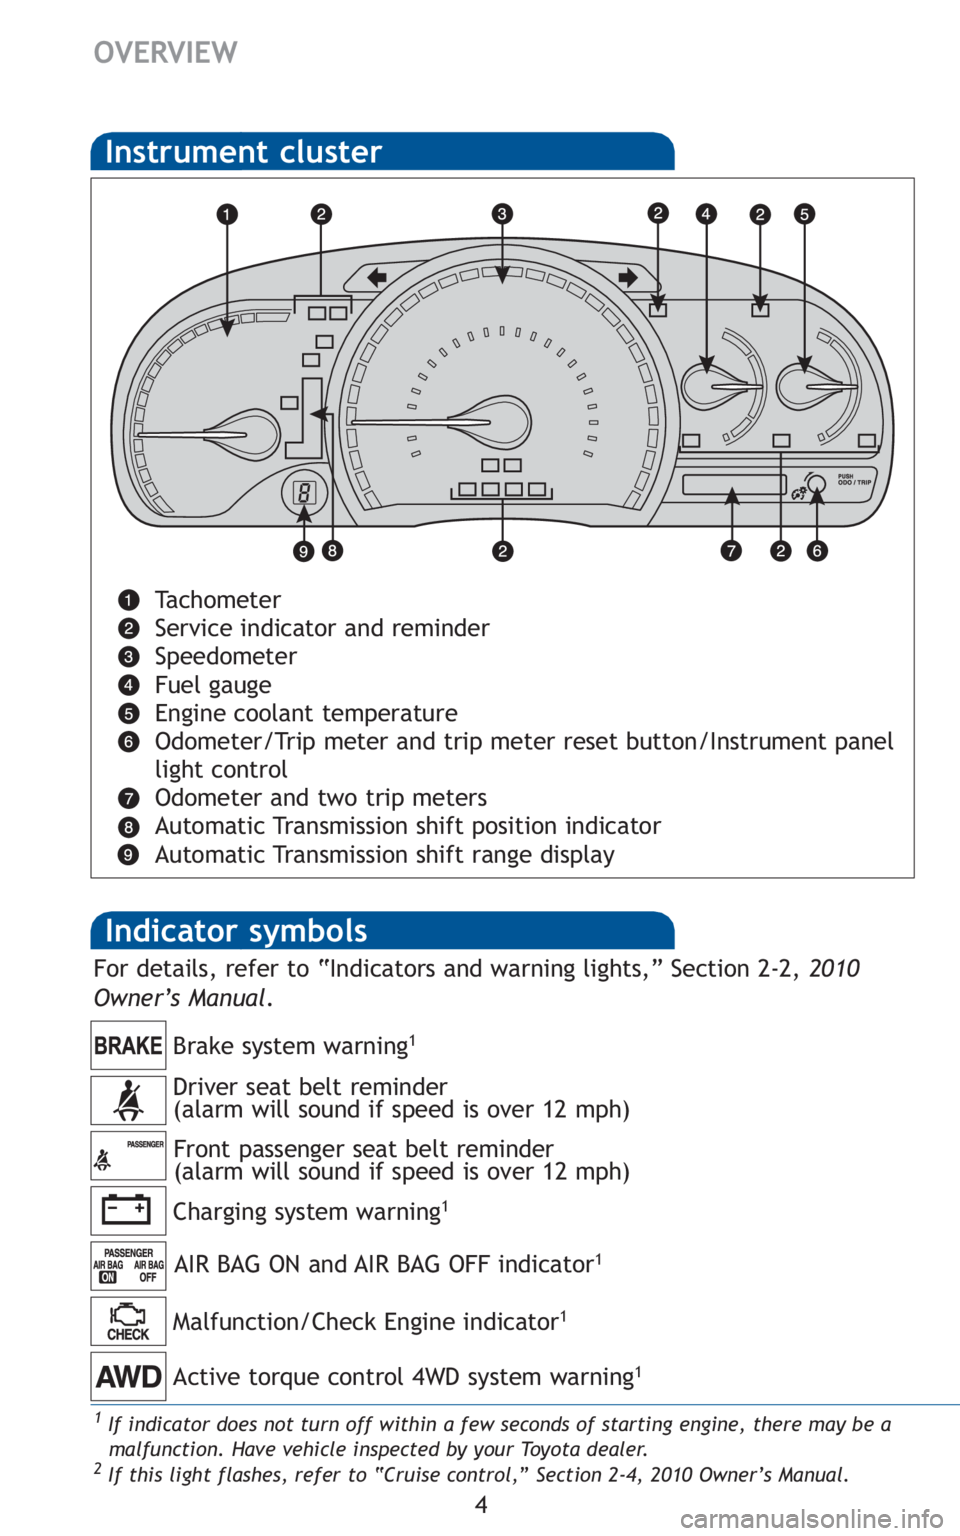 TOYOTA VENZA 2010  Owners Manual (in English) 4
OVERVIEW
Indicator symbols 
Instrument cluster
Tachometer
Service indicator and reminder 
Speedometer
Fuel gauge
Engine coolant temperature 
Odometer/Trip meter and trip meter reset button/Instrumen